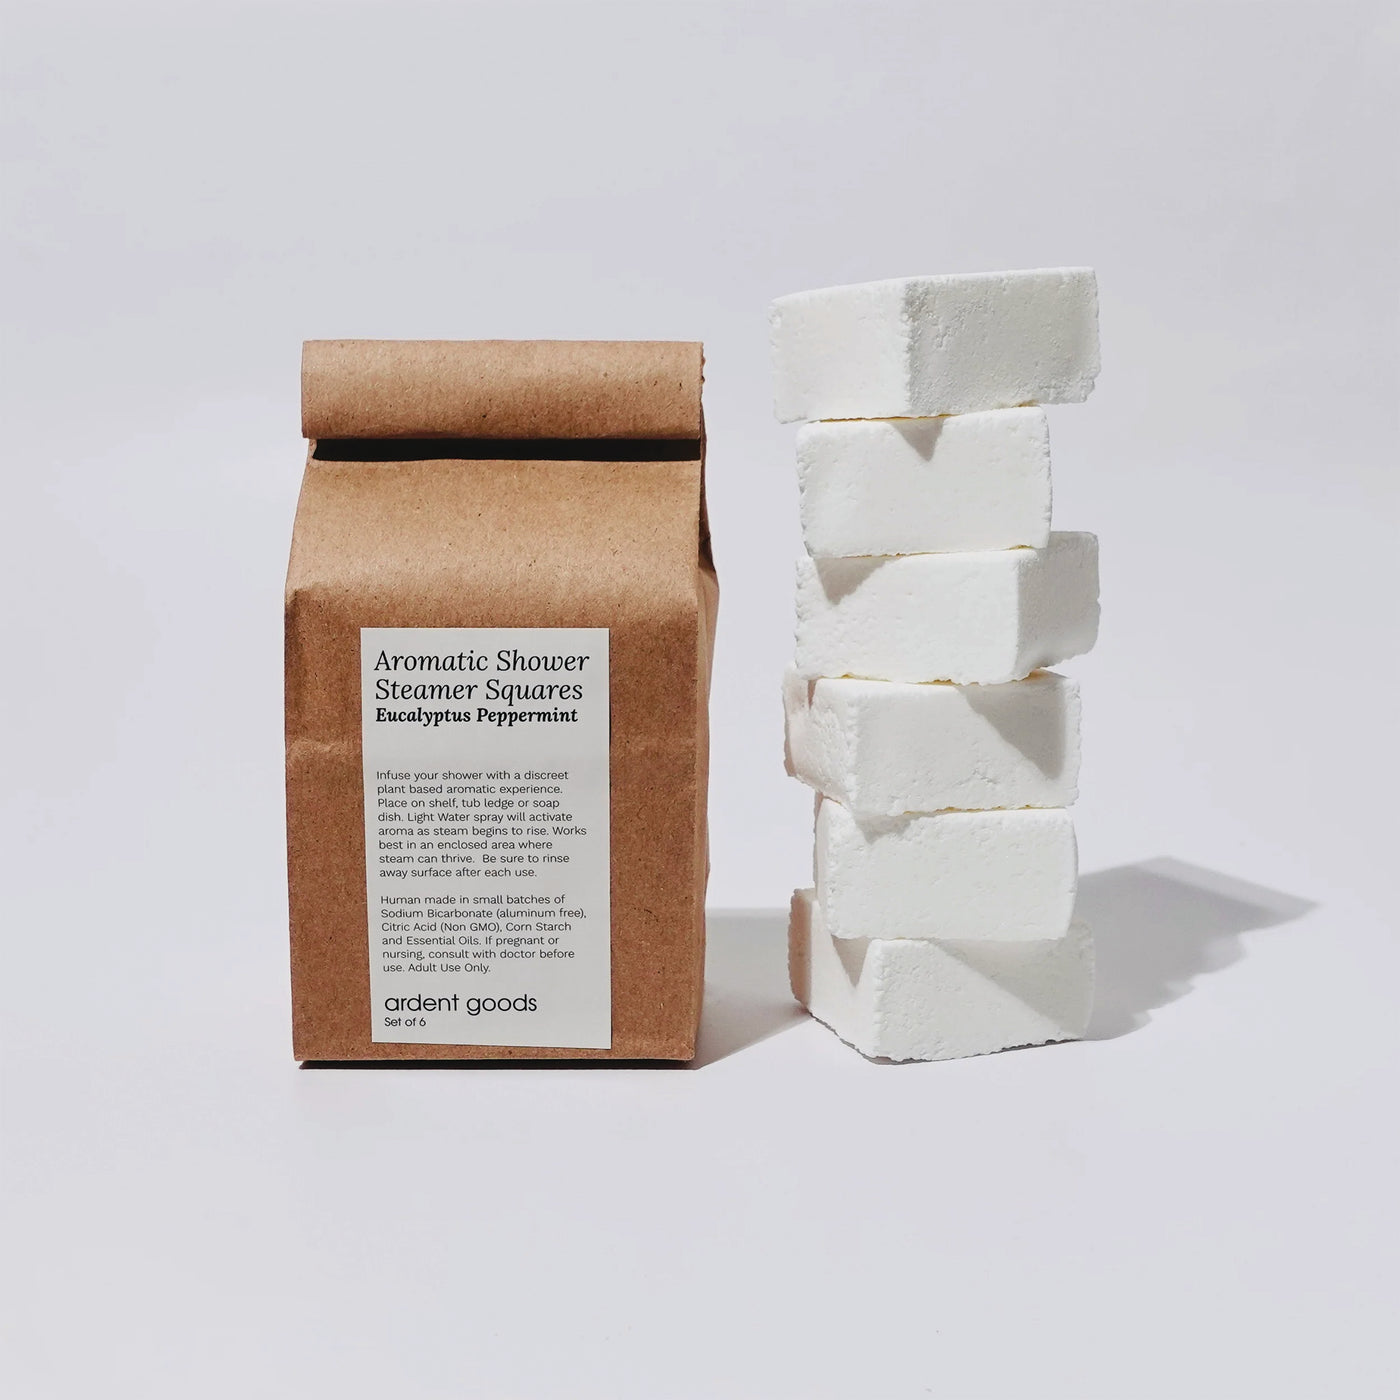 aromatic eucalyptus shower steamer squares by ardent goods